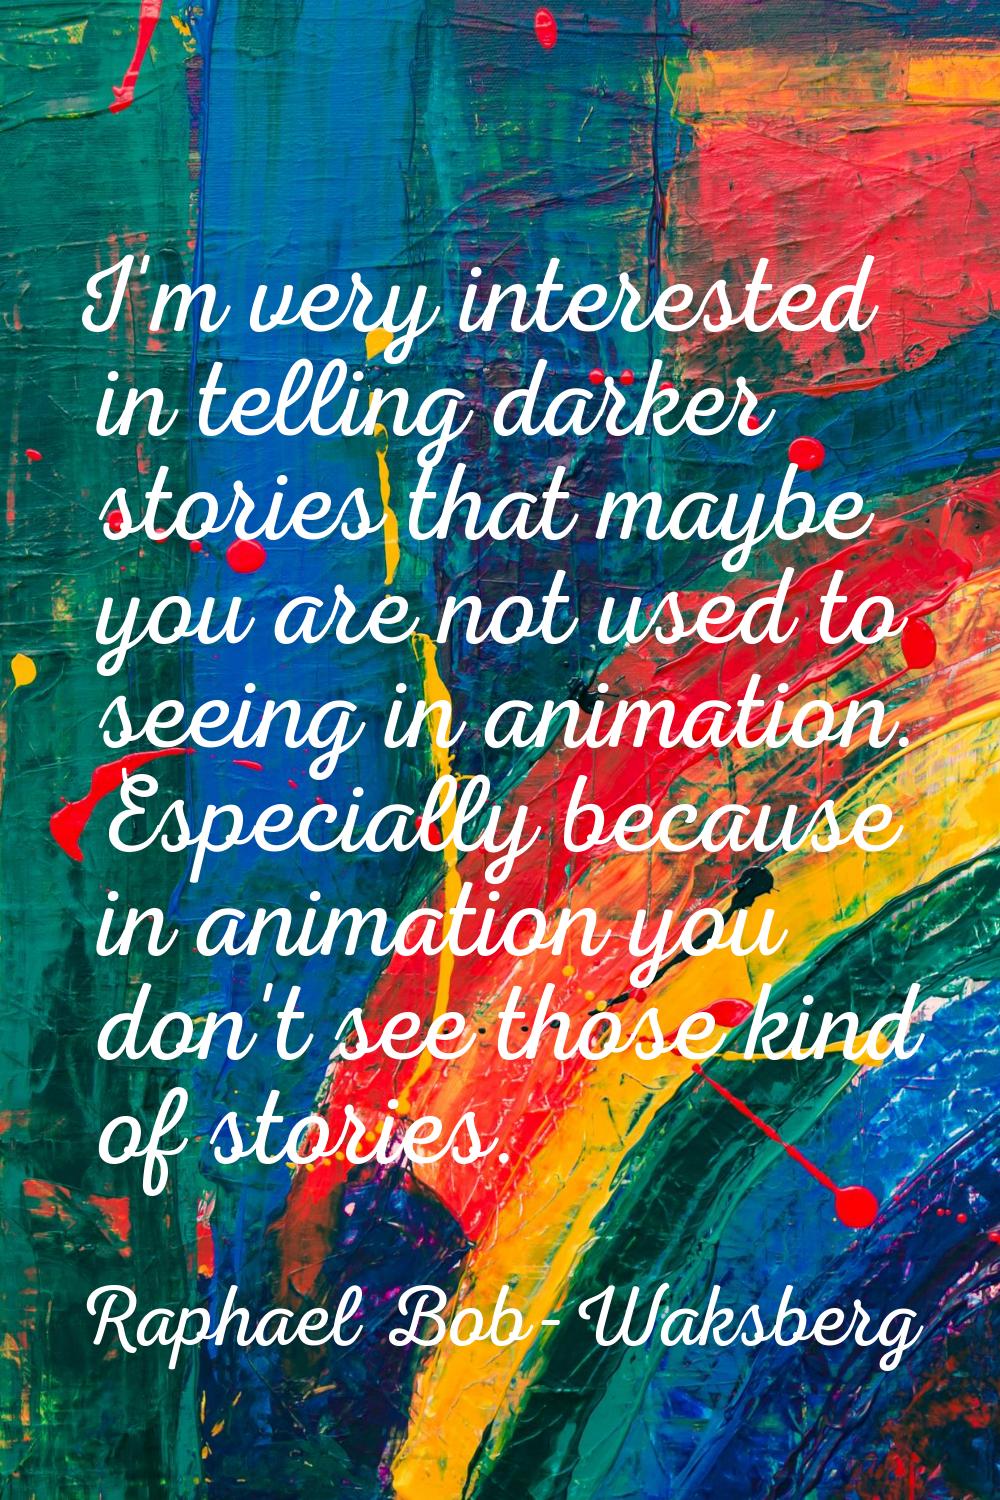 I'm very interested in telling darker stories that maybe you are not used to seeing in animation. E